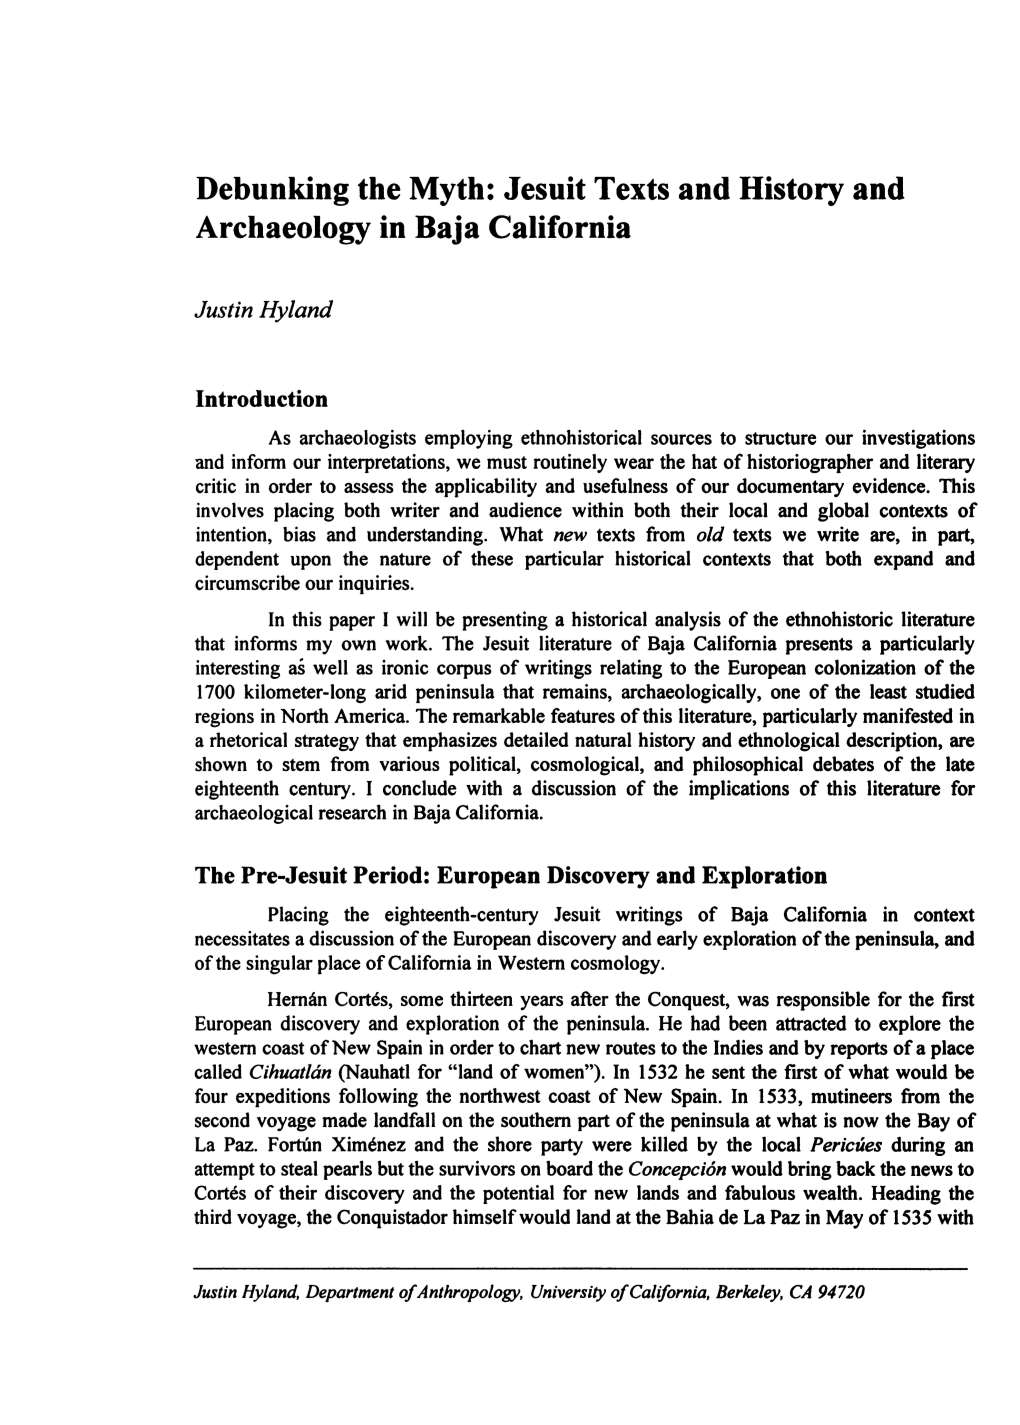 Debunking the Myth: Jesuit Texts and History and Archaeology in Baja California